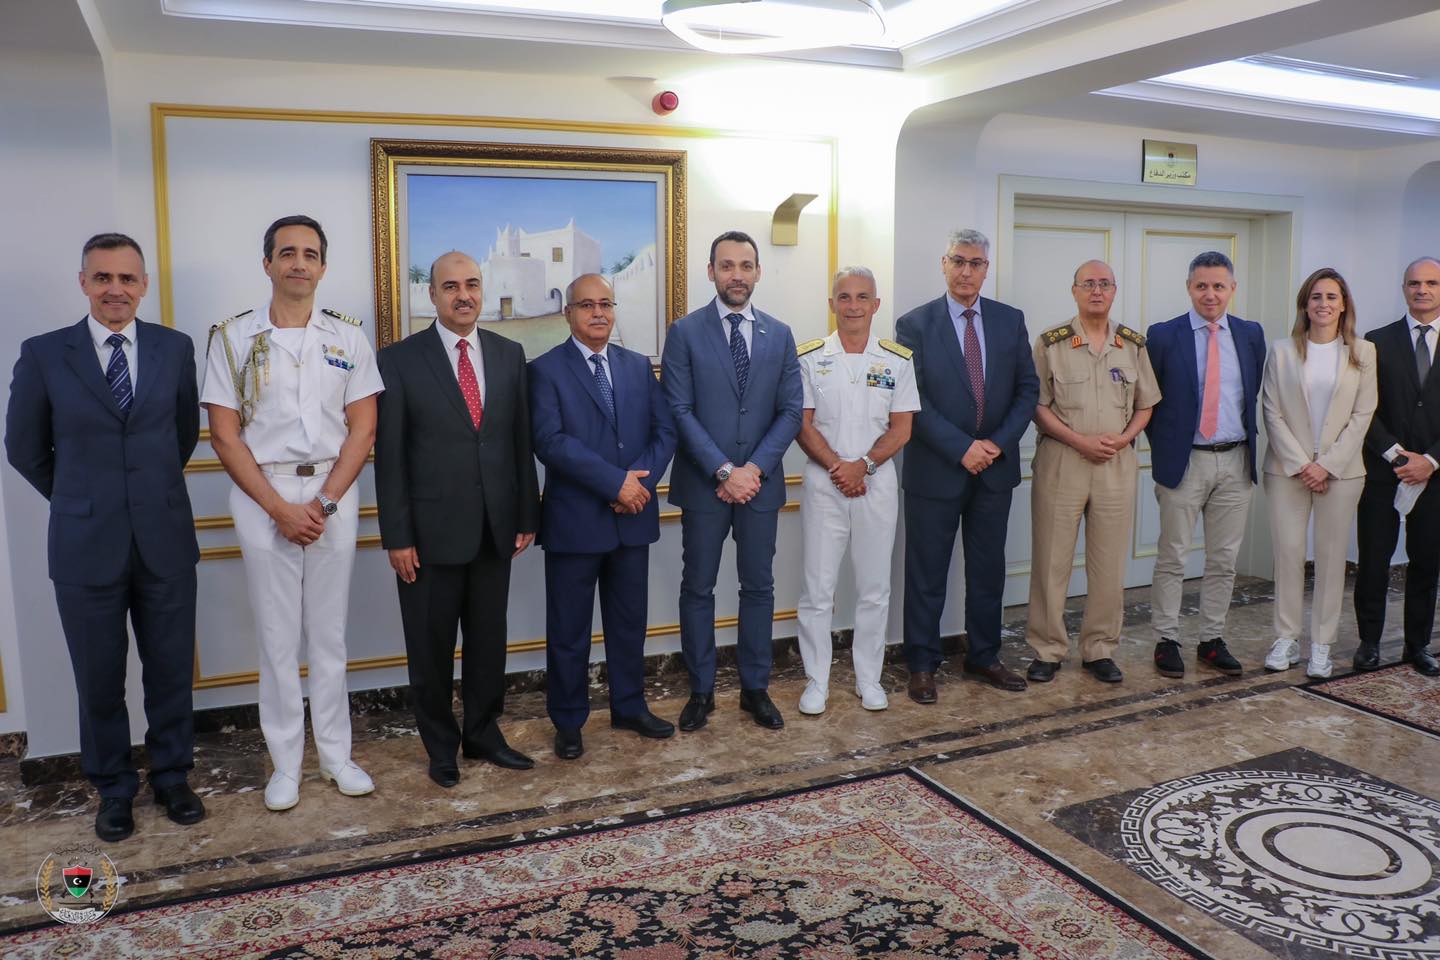 The Ministry of Defense is looking to strengthen military cooperation with its Italian counterpart.